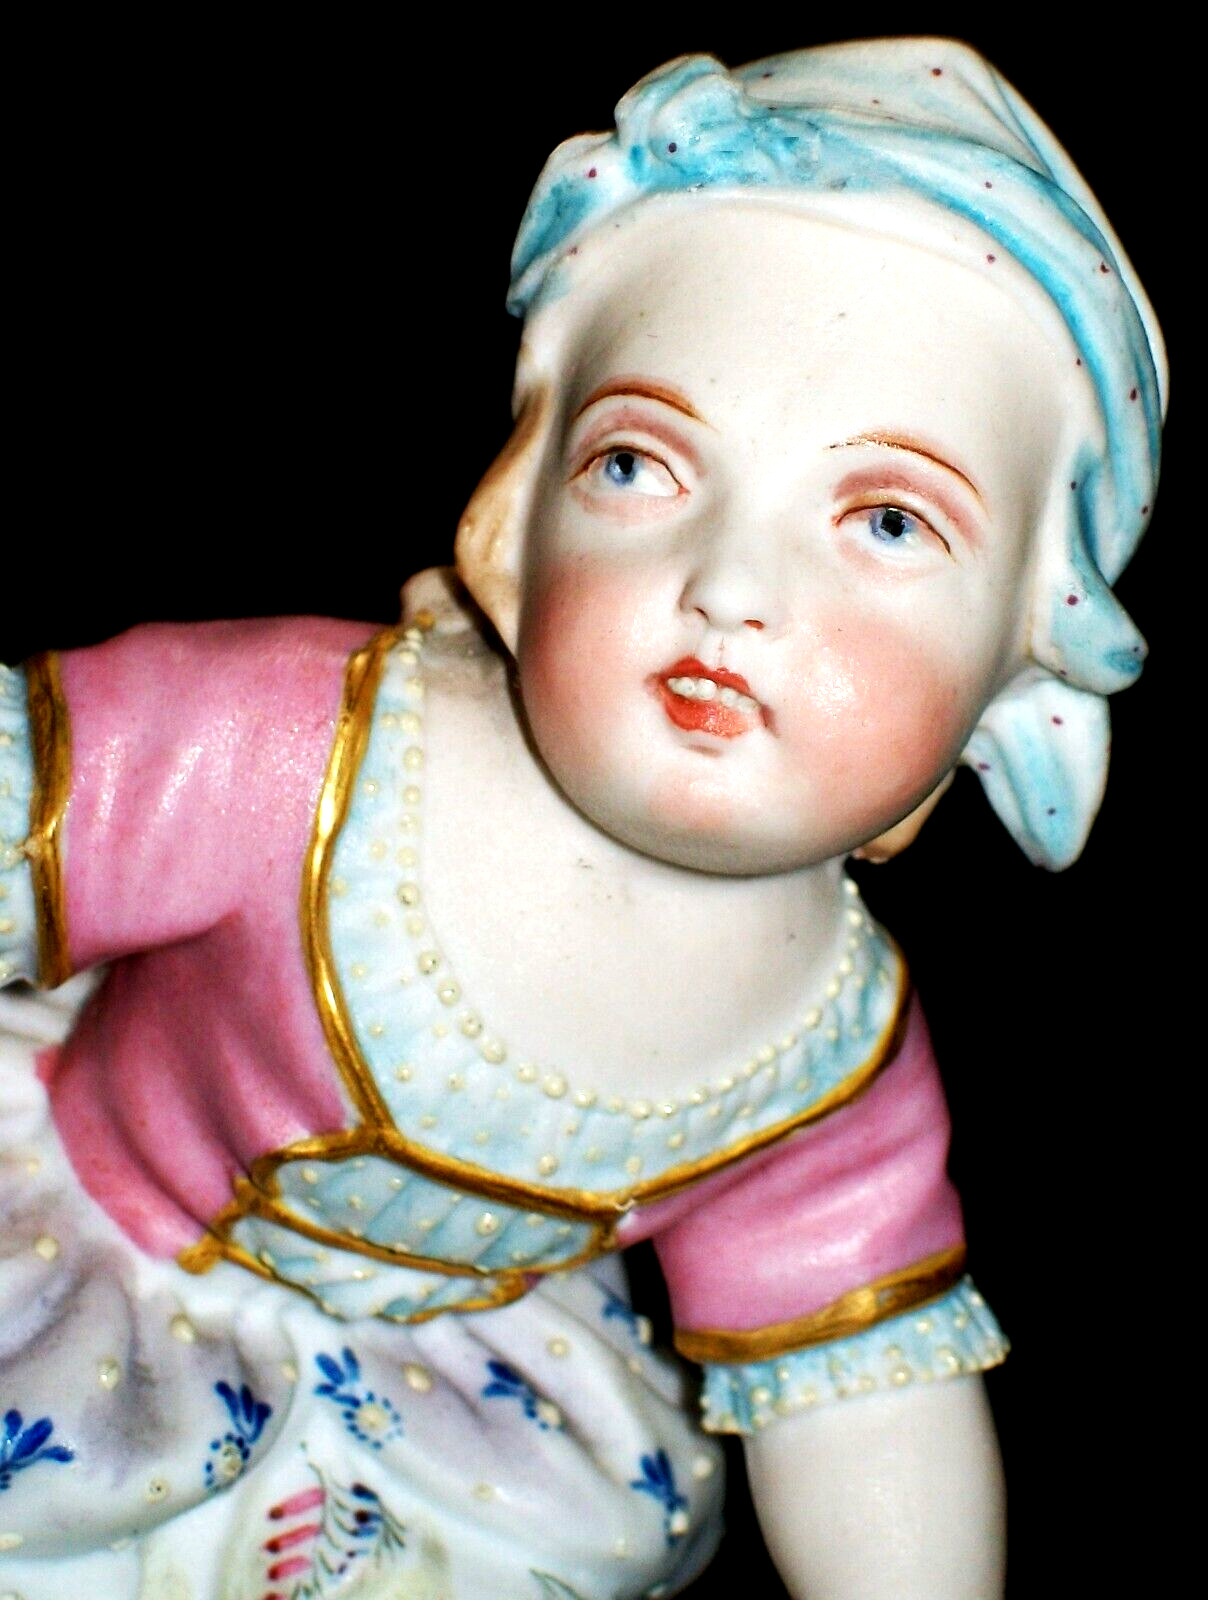 ANTIQUE FRENCH PARIS JEAN GILLE GIRL DOLL PLAYING BISQUE PORCELAIN FIGURINE